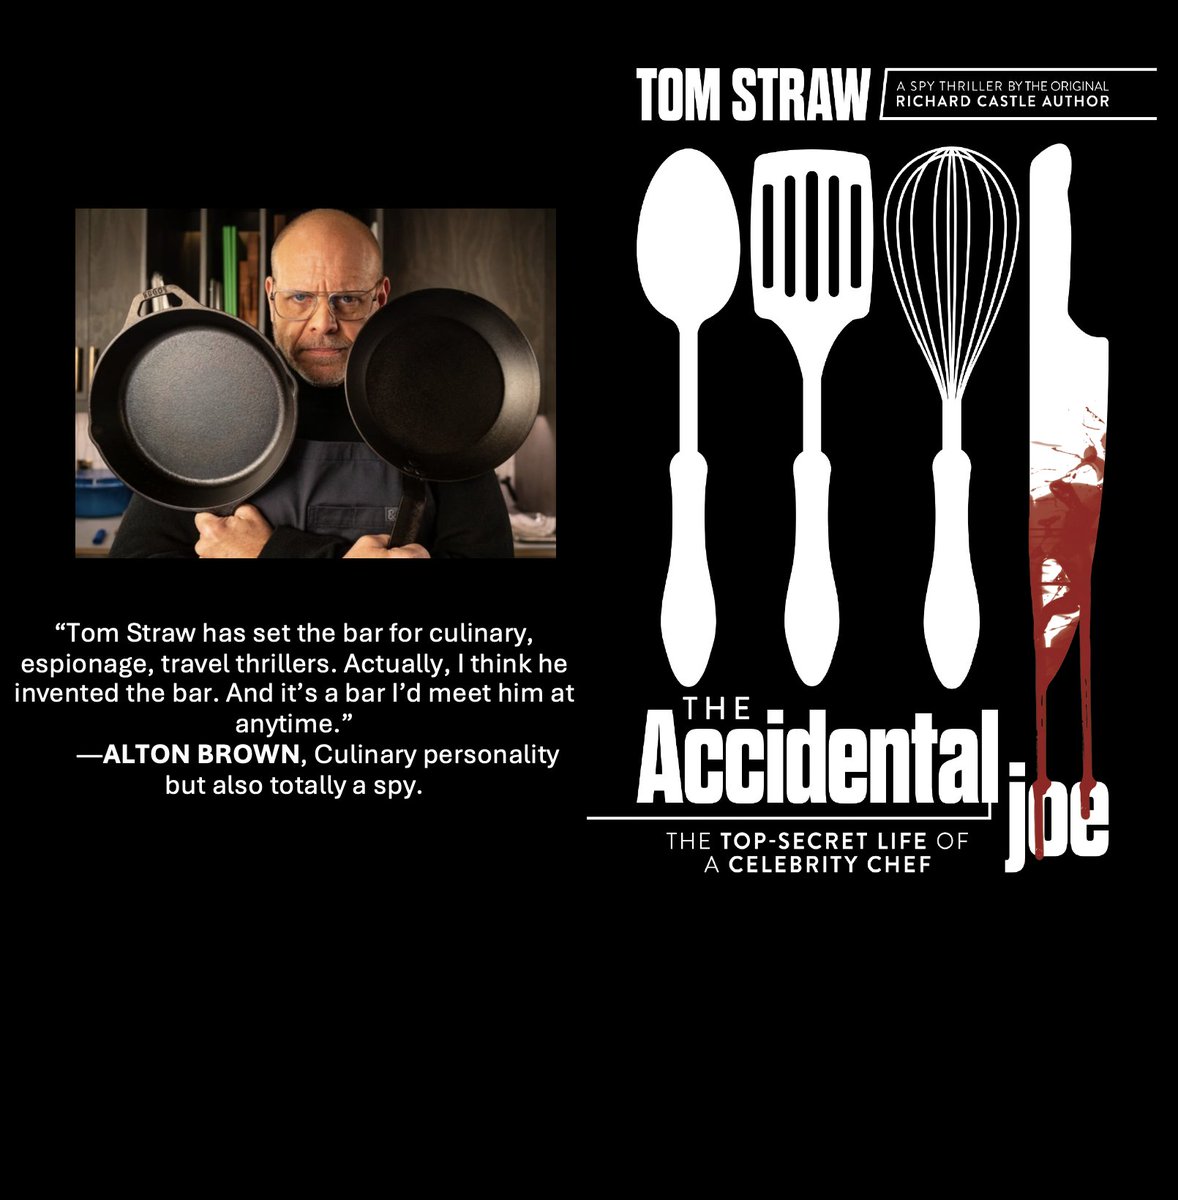 He knows good eats. @altonbrown also has good words about my upcoming spy thriller, THE ACCIDENTAL JOE. Preorder now at: Amazon.com, barnesandnoble.com, Bookshop.org, IndieBound.org, and other booksellers. And thank you, Alton!